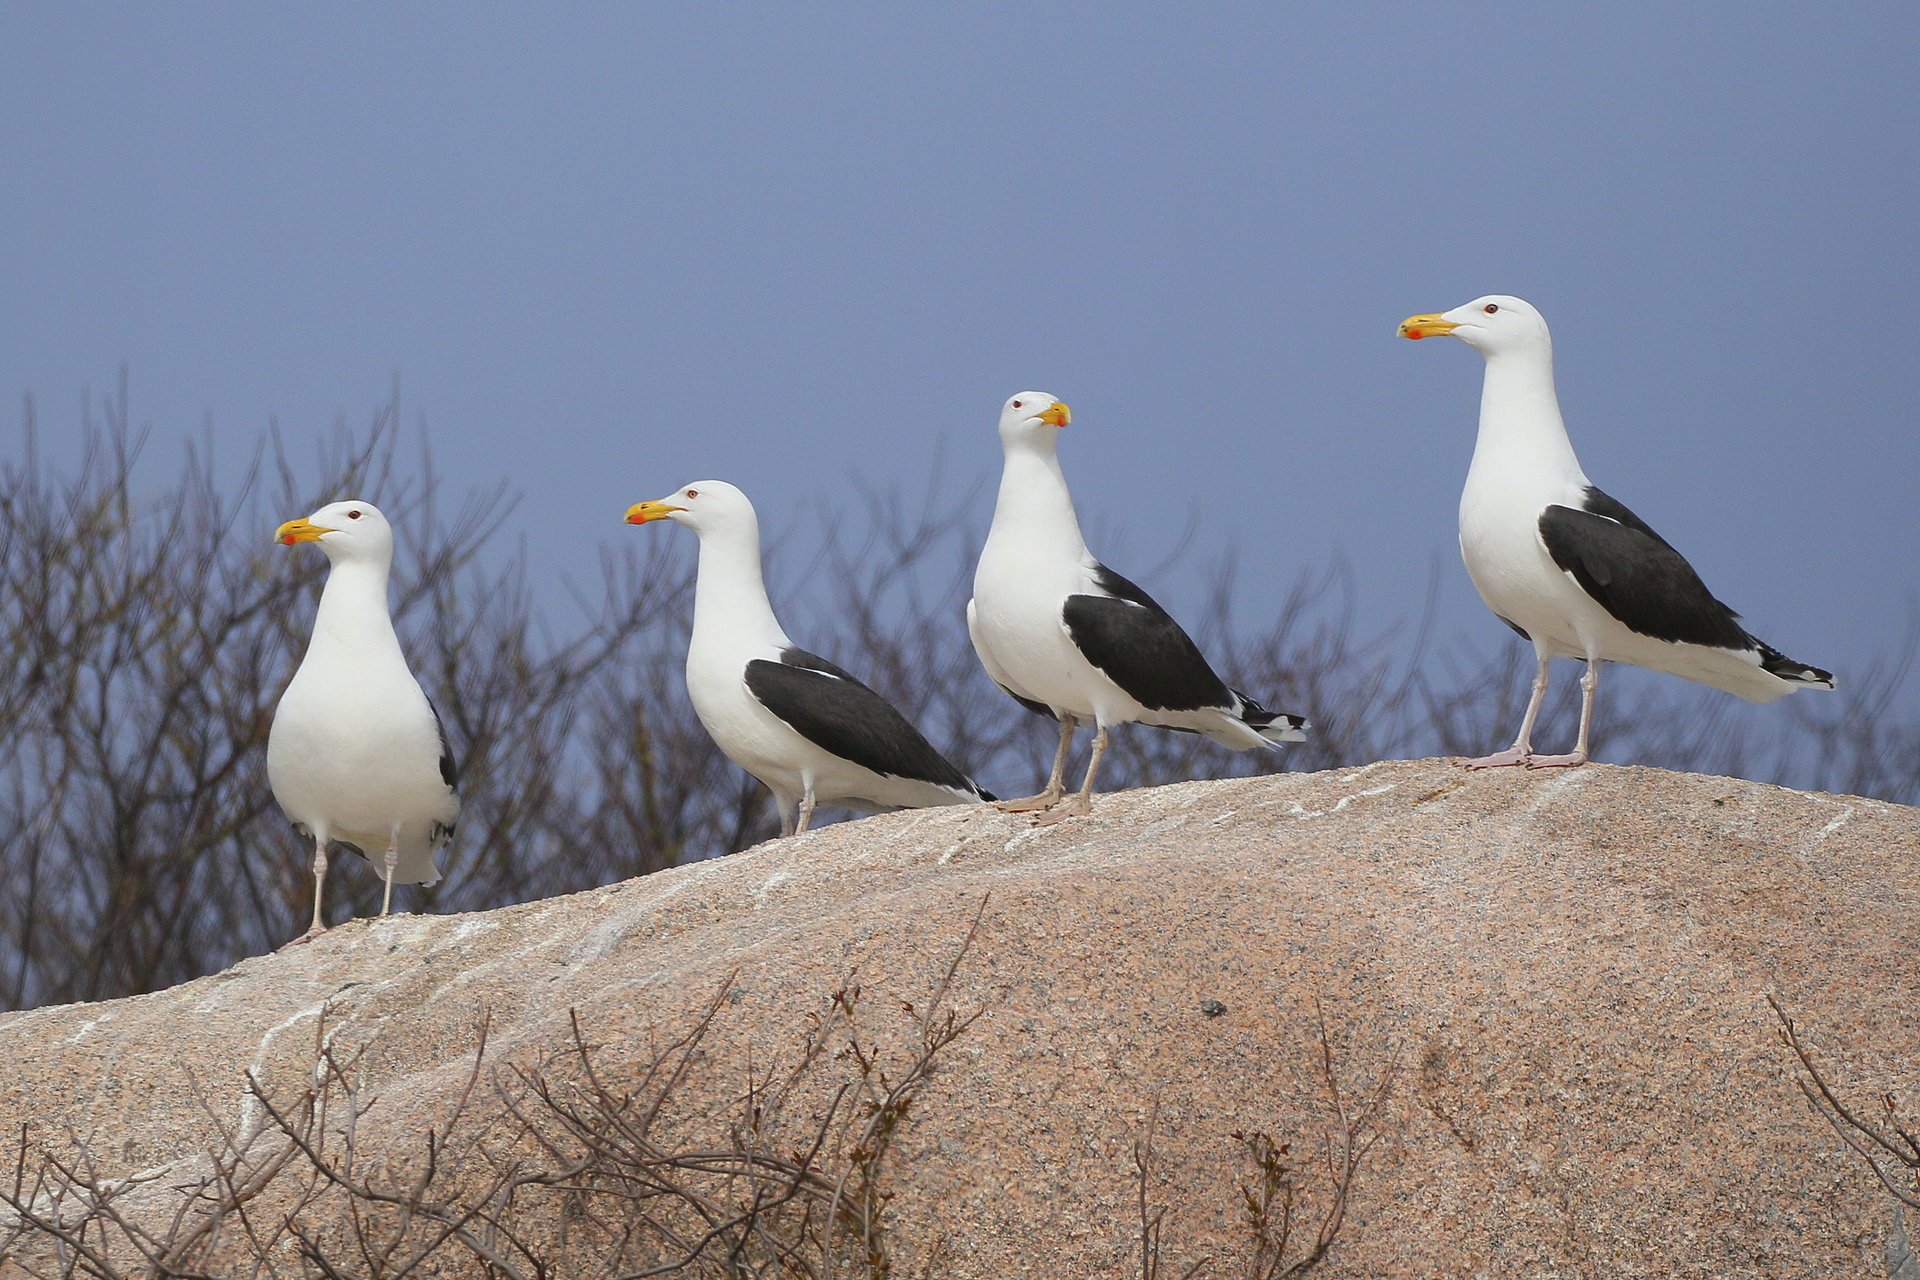 four Great Black-backed Gulls on a rock